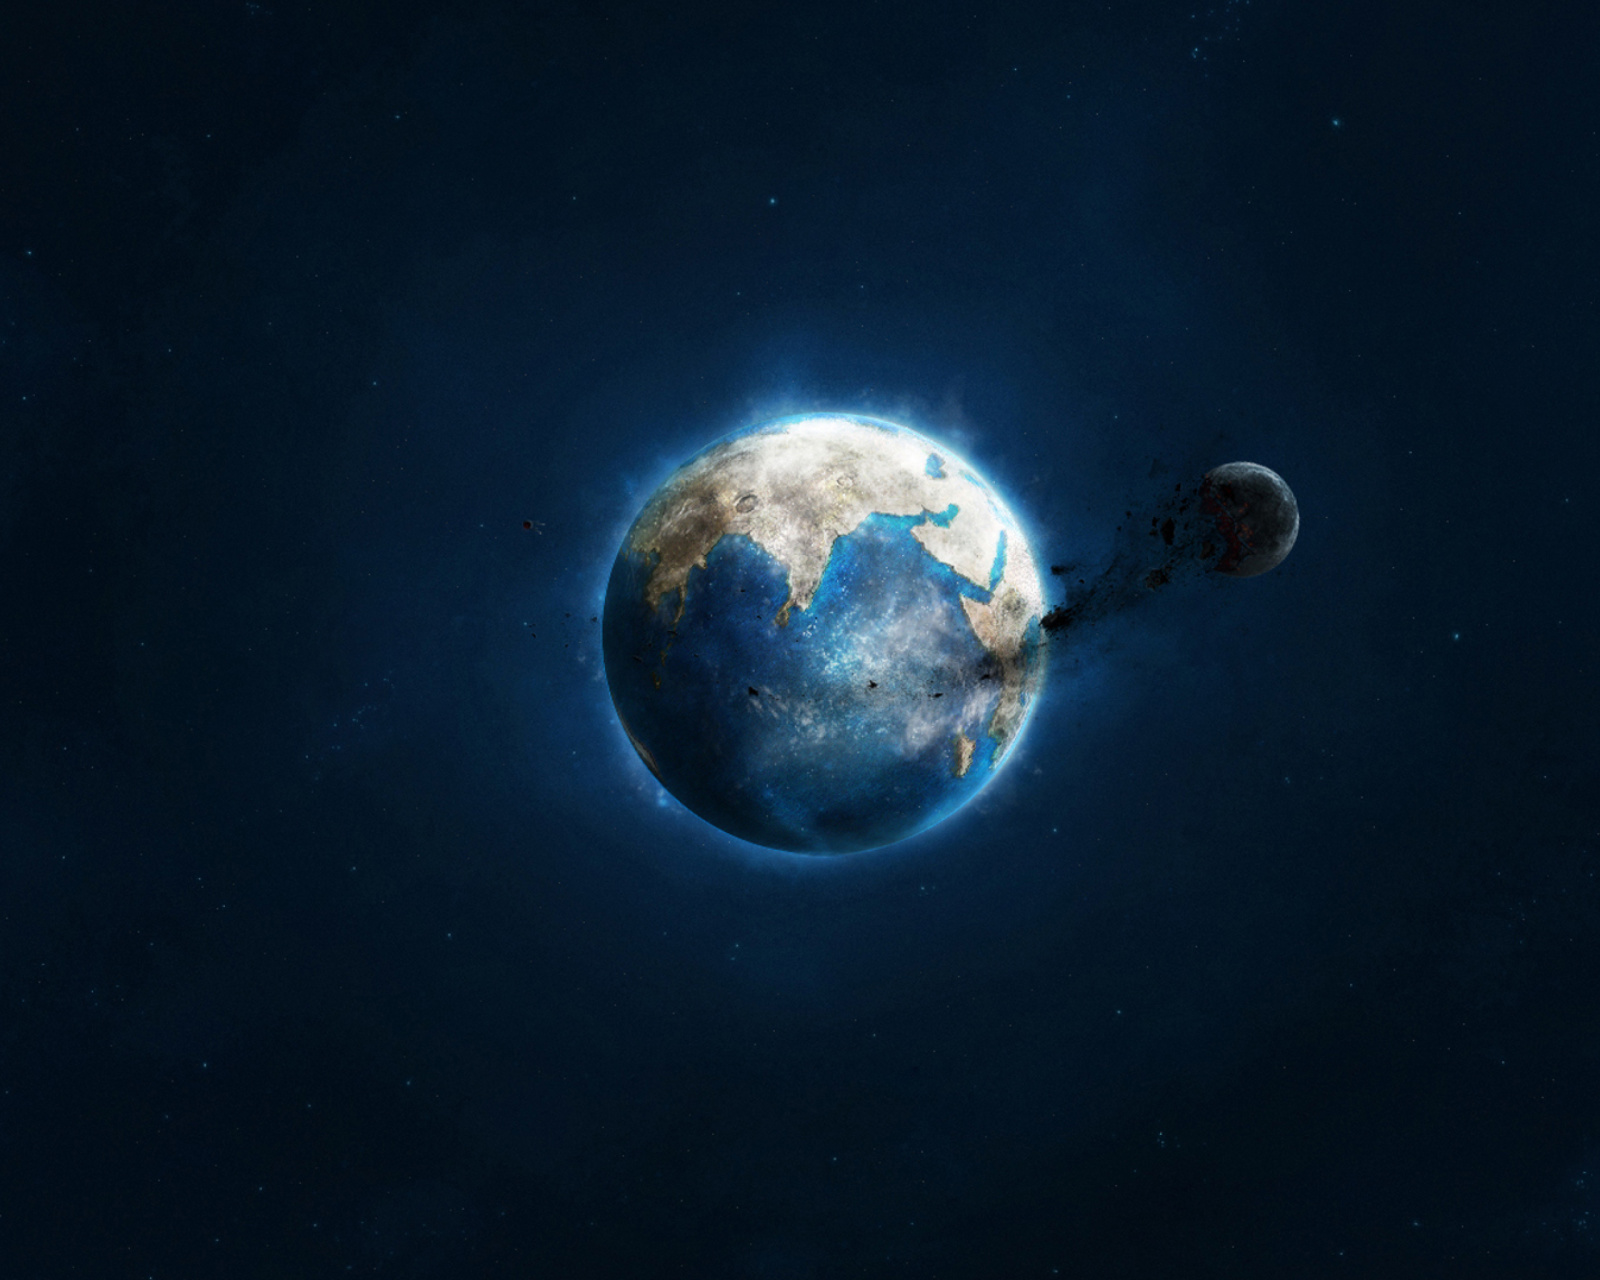 Planet and Asteroid wallpaper 1600x1280